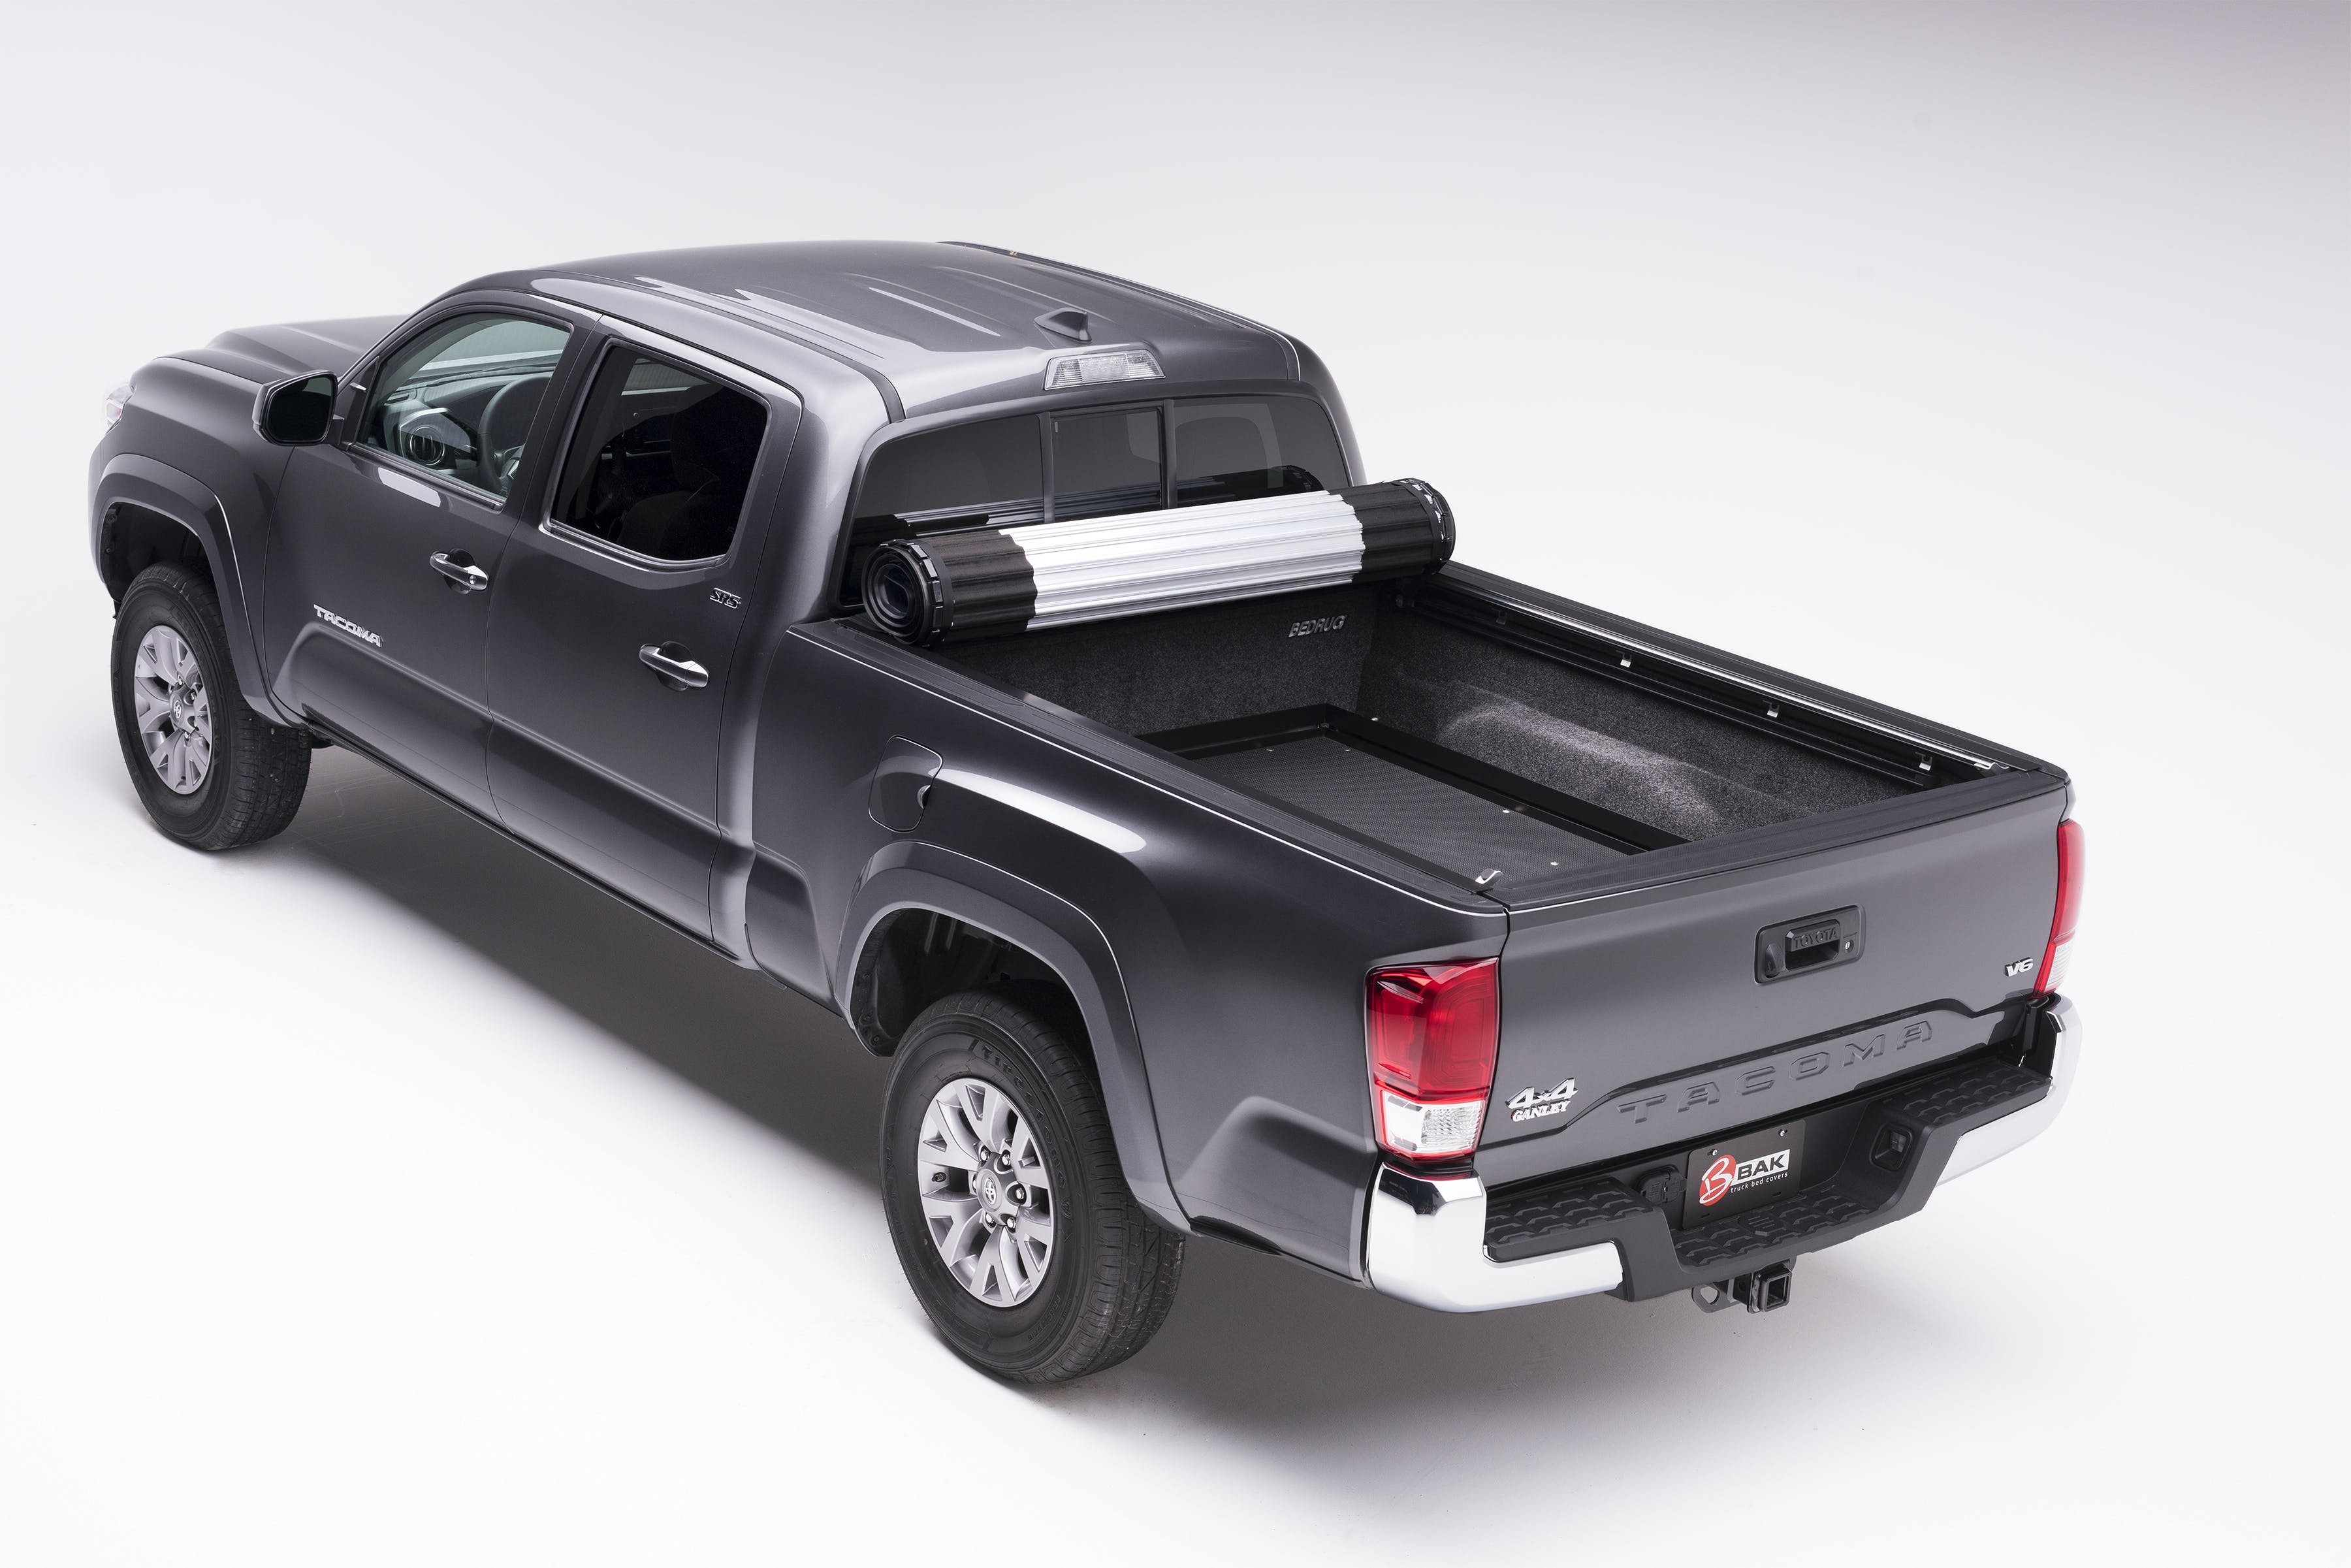 BAK Industries 39427 Revolver X2 Hard Rolling Truck Bed Cover